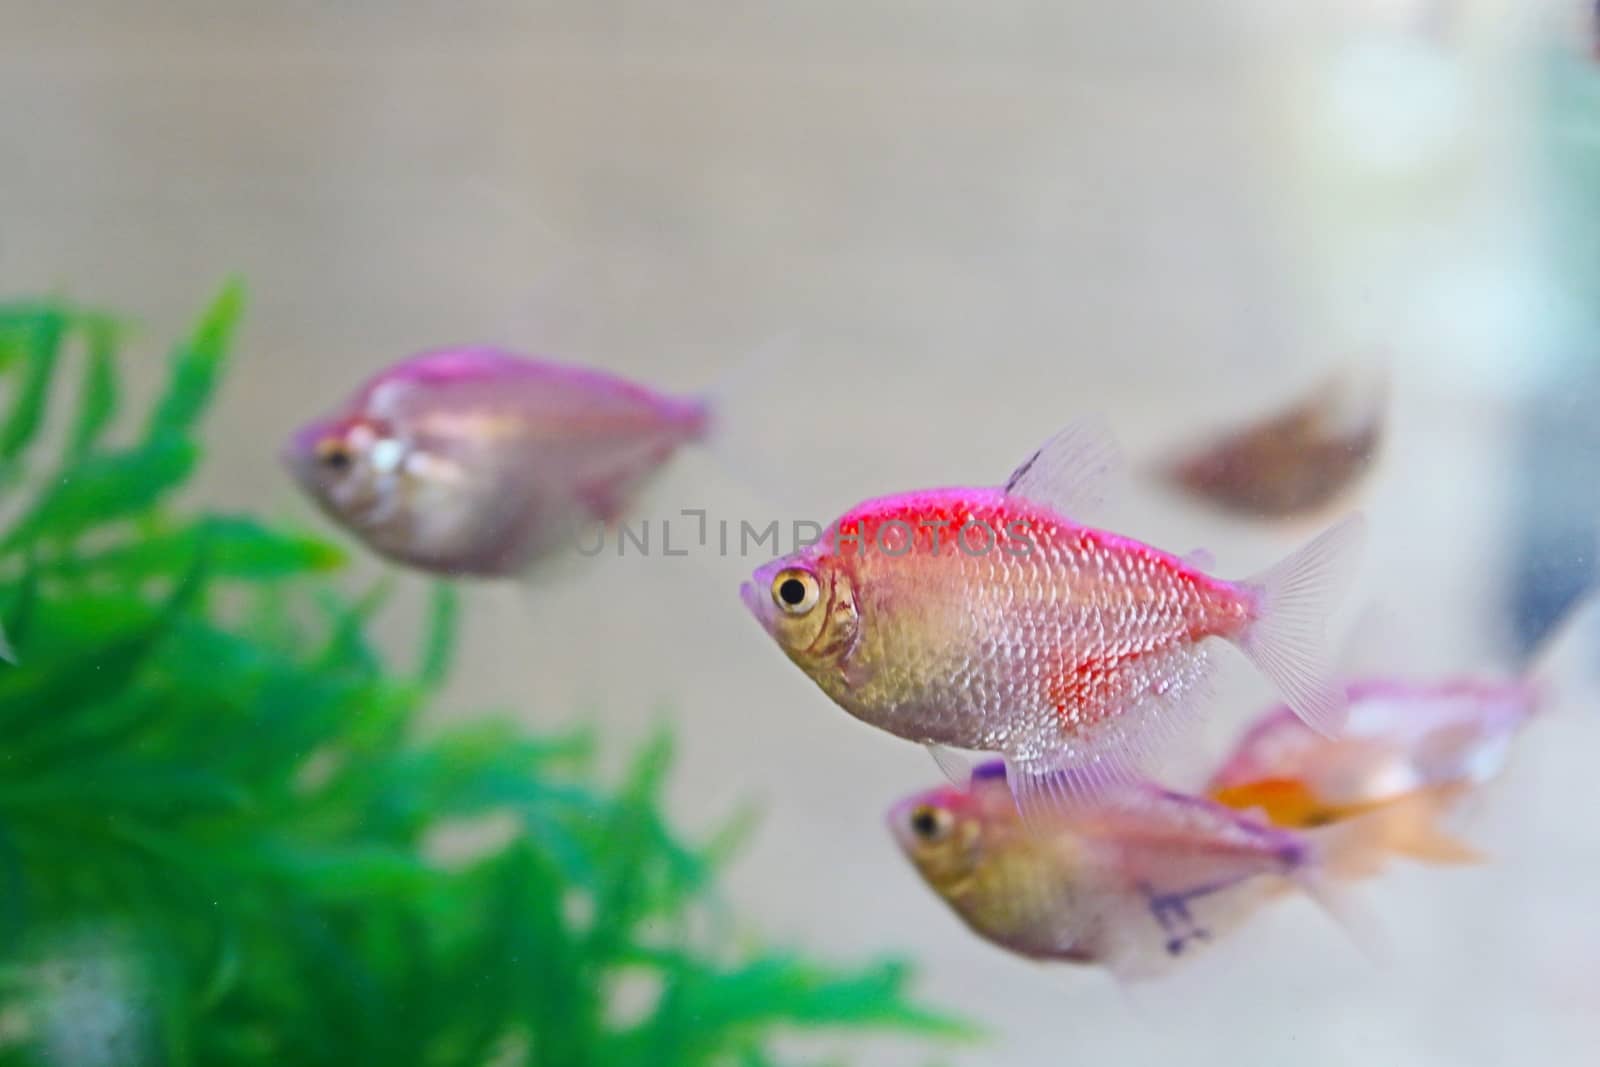 All Beautiful and Colorful Discus Fish Species in Aquarium fish, brought to us from the waters of the Amazon by cgdeaw